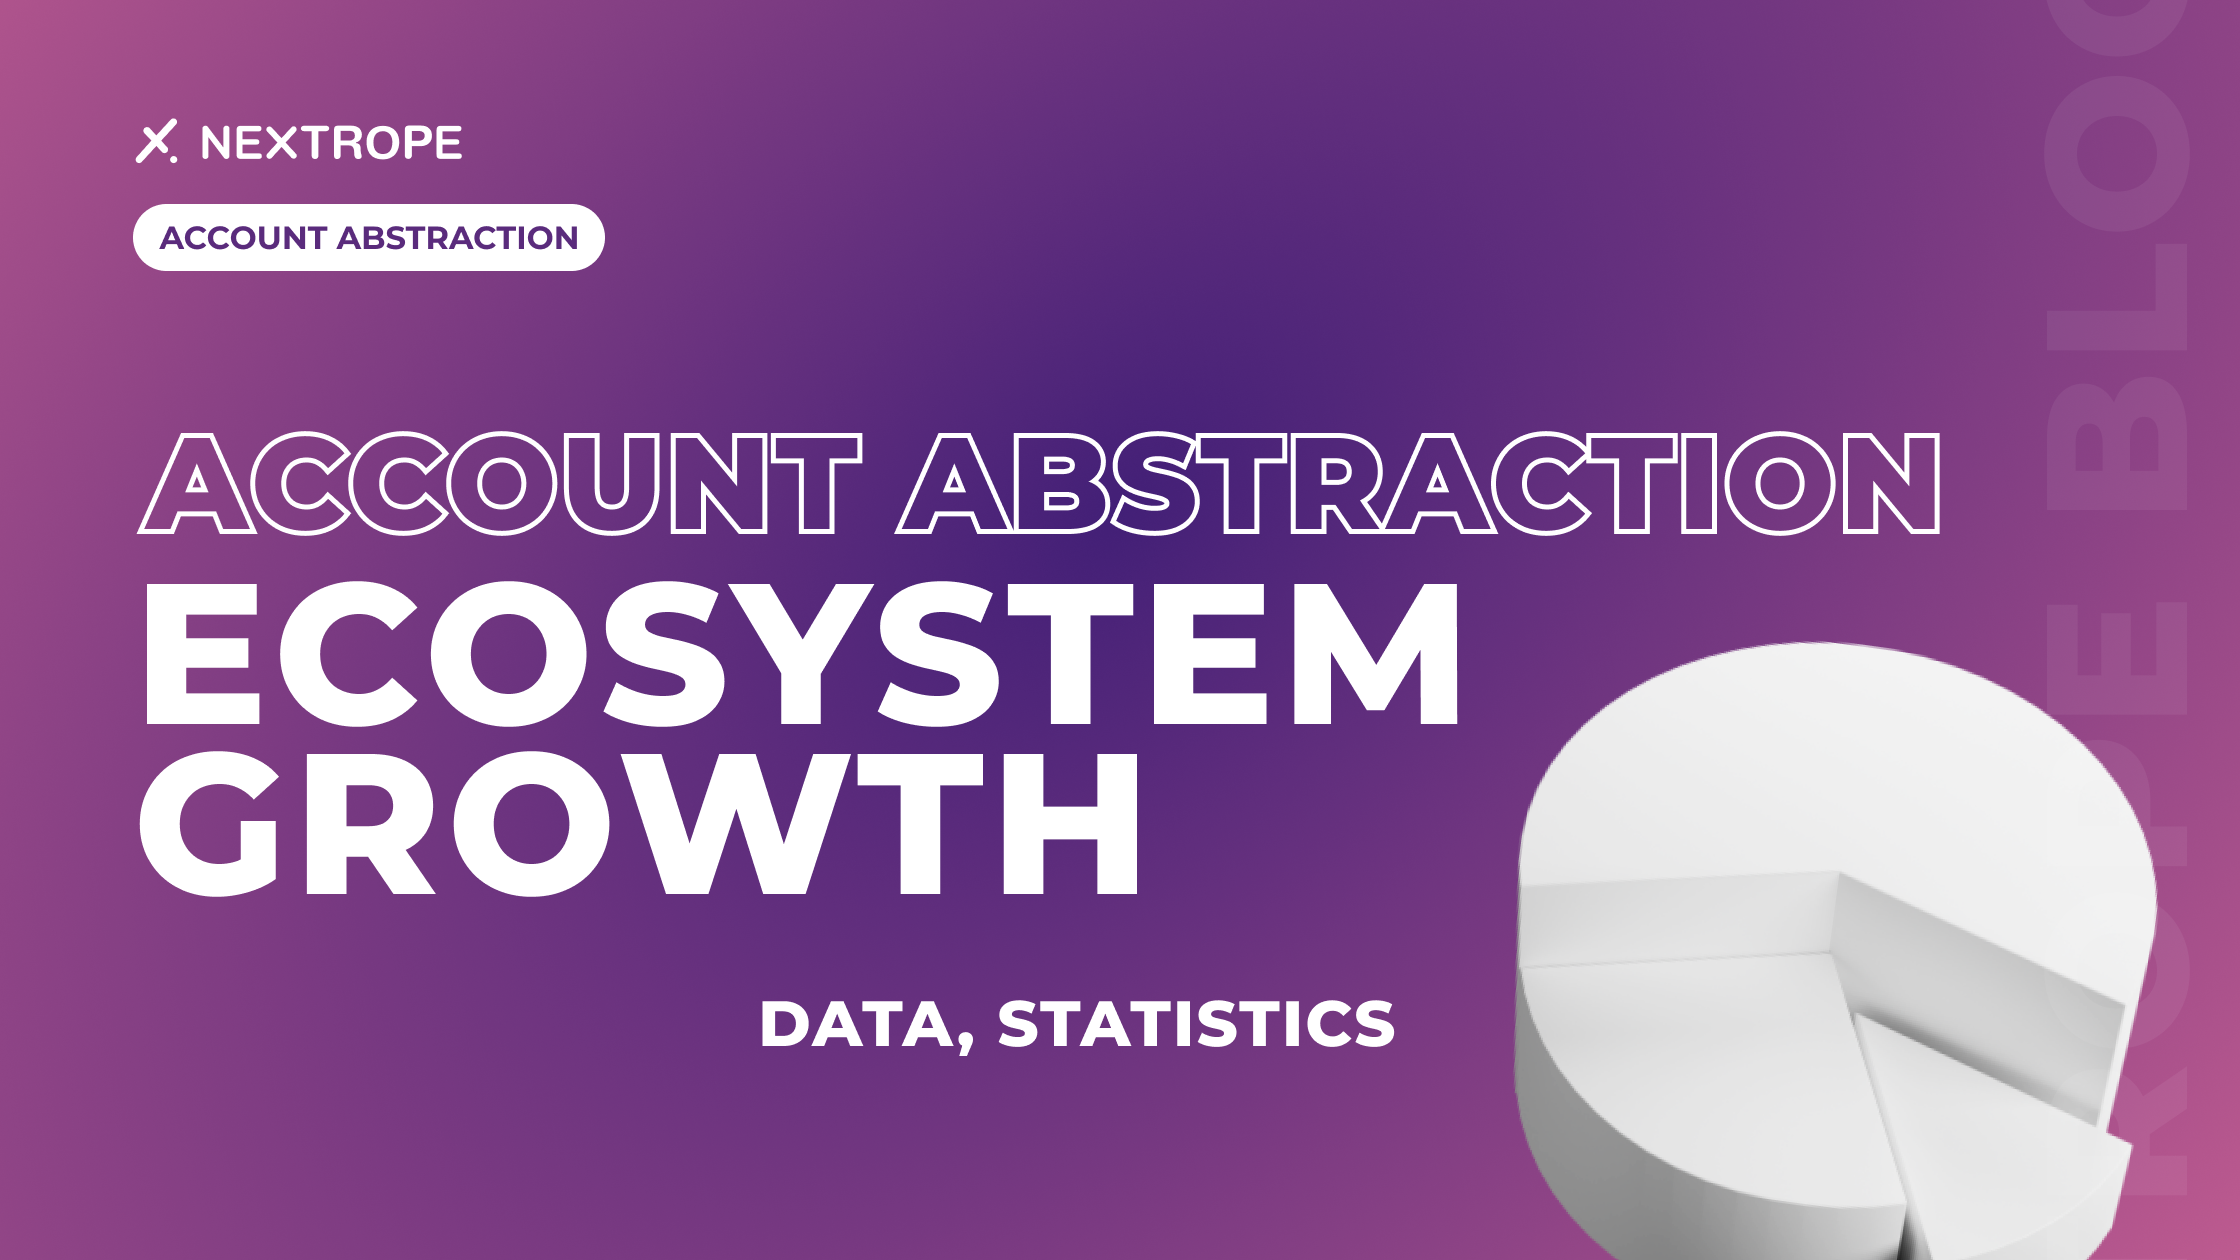 Account Abstraction Ecosystem Growth – Data & Statistics